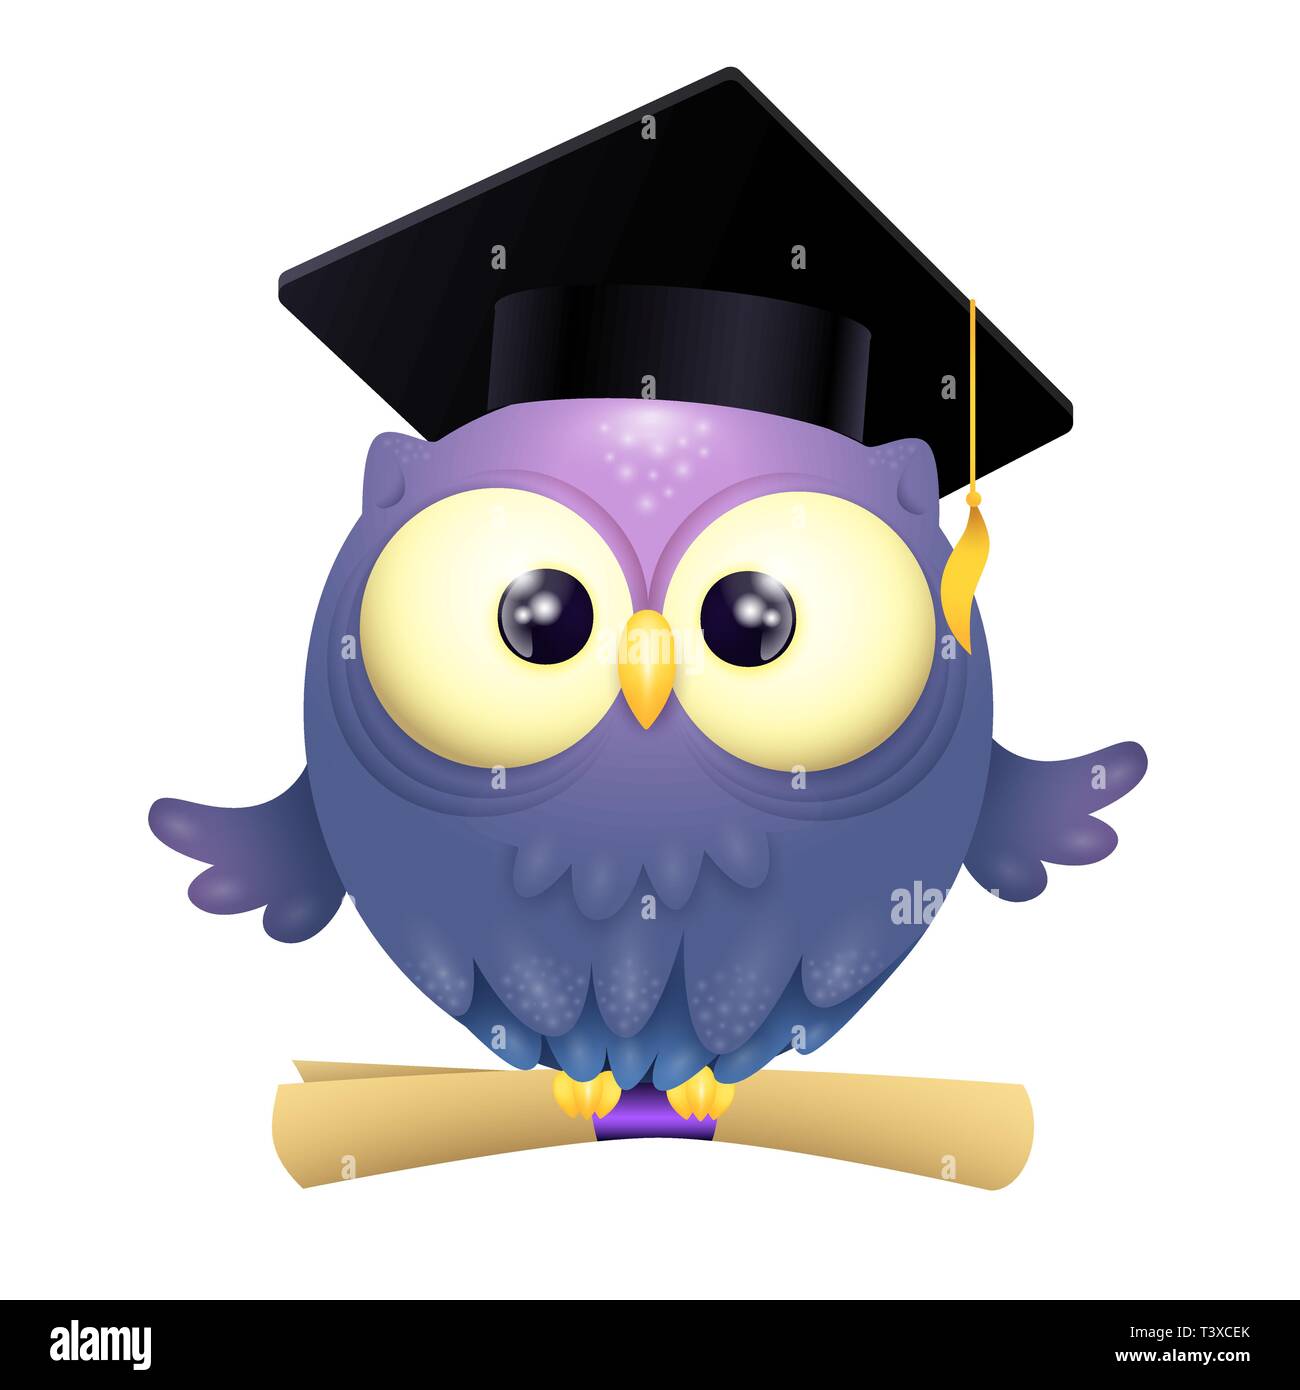 Vector Illustration of a cute lillte Owl wearing graduation cap and holding diploma while flying Stock Vector